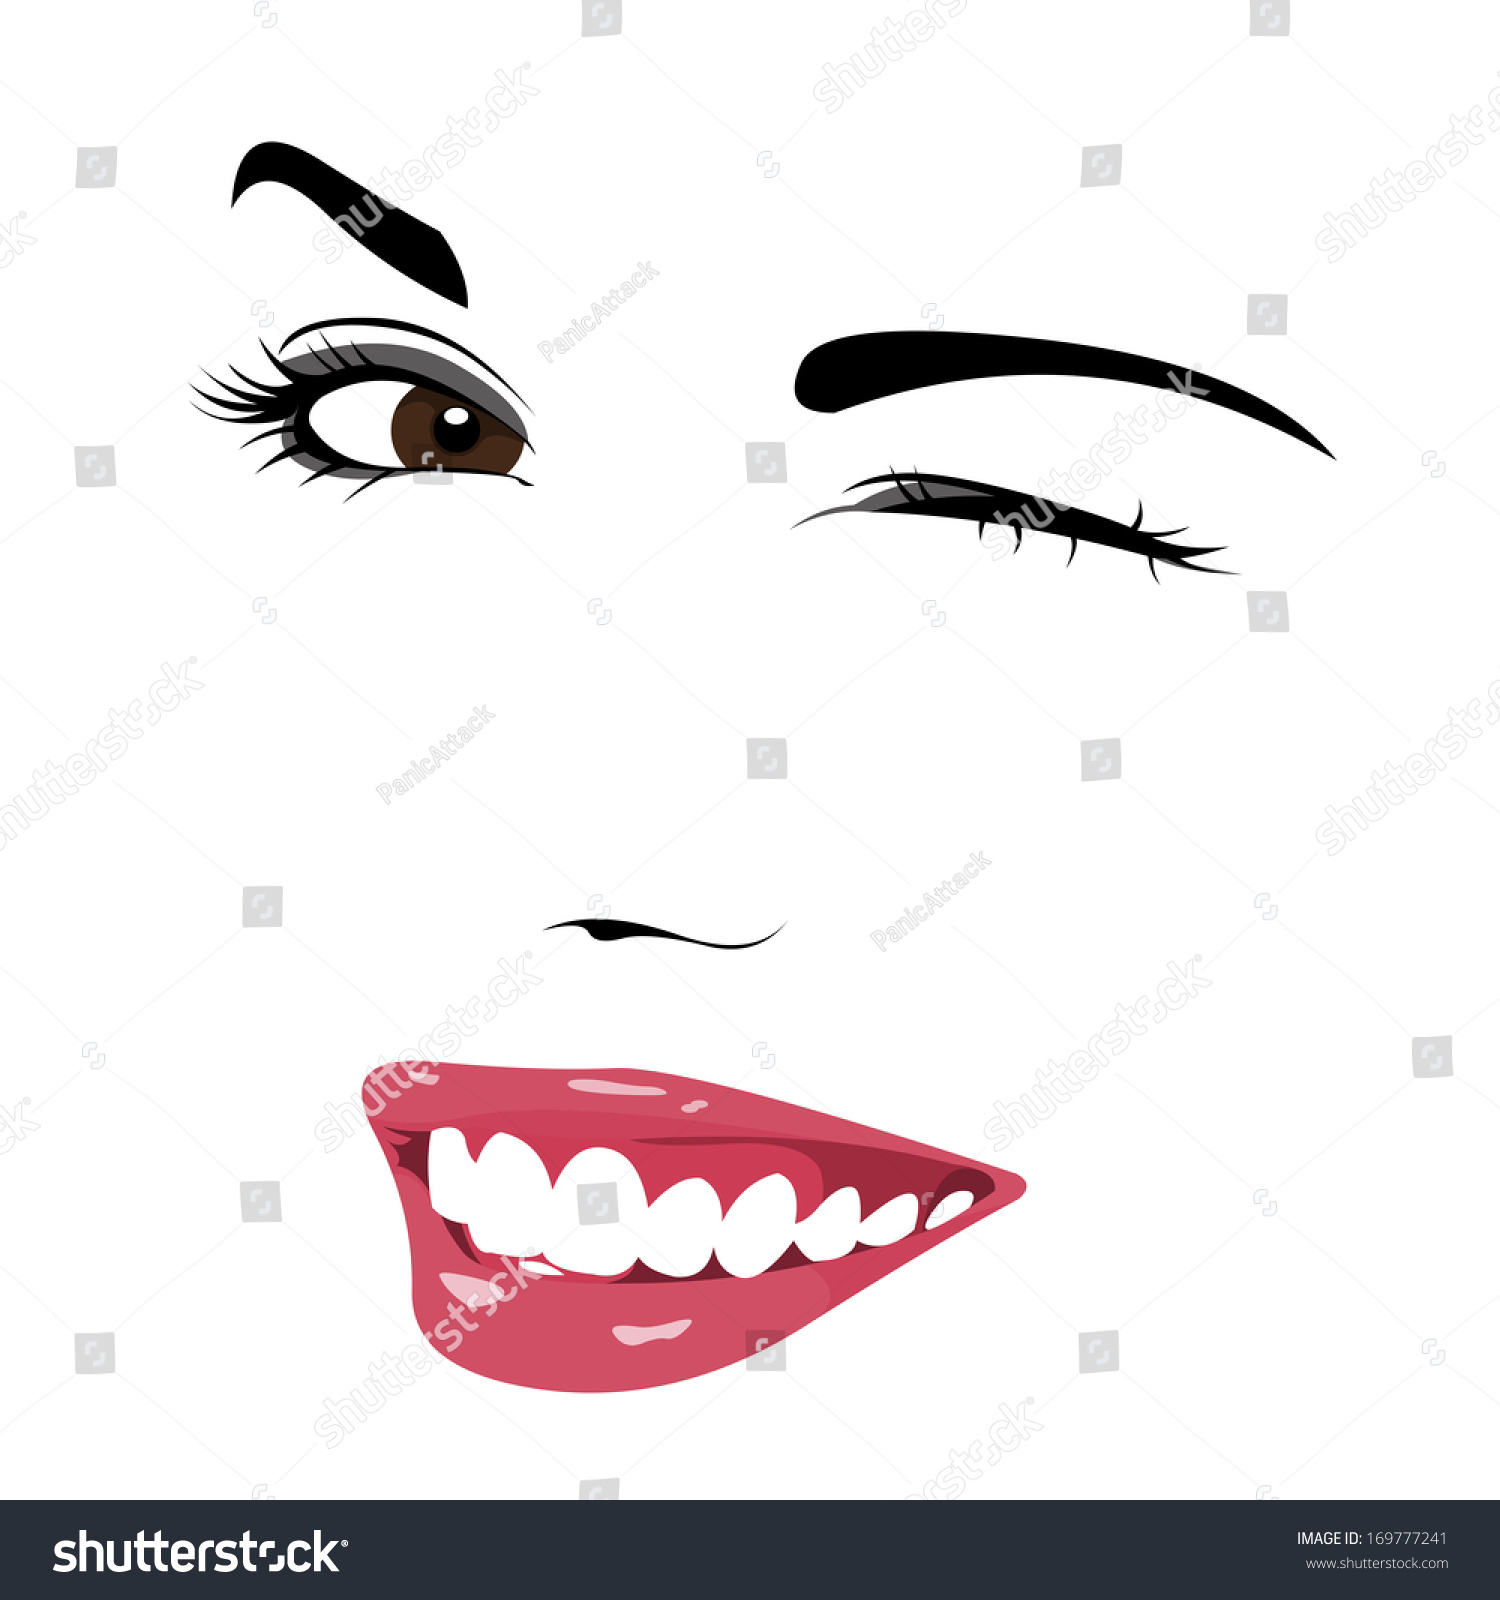 Outline Sketch Cute Young Woman Wink Stock Vector 169777241 - Shutterstock